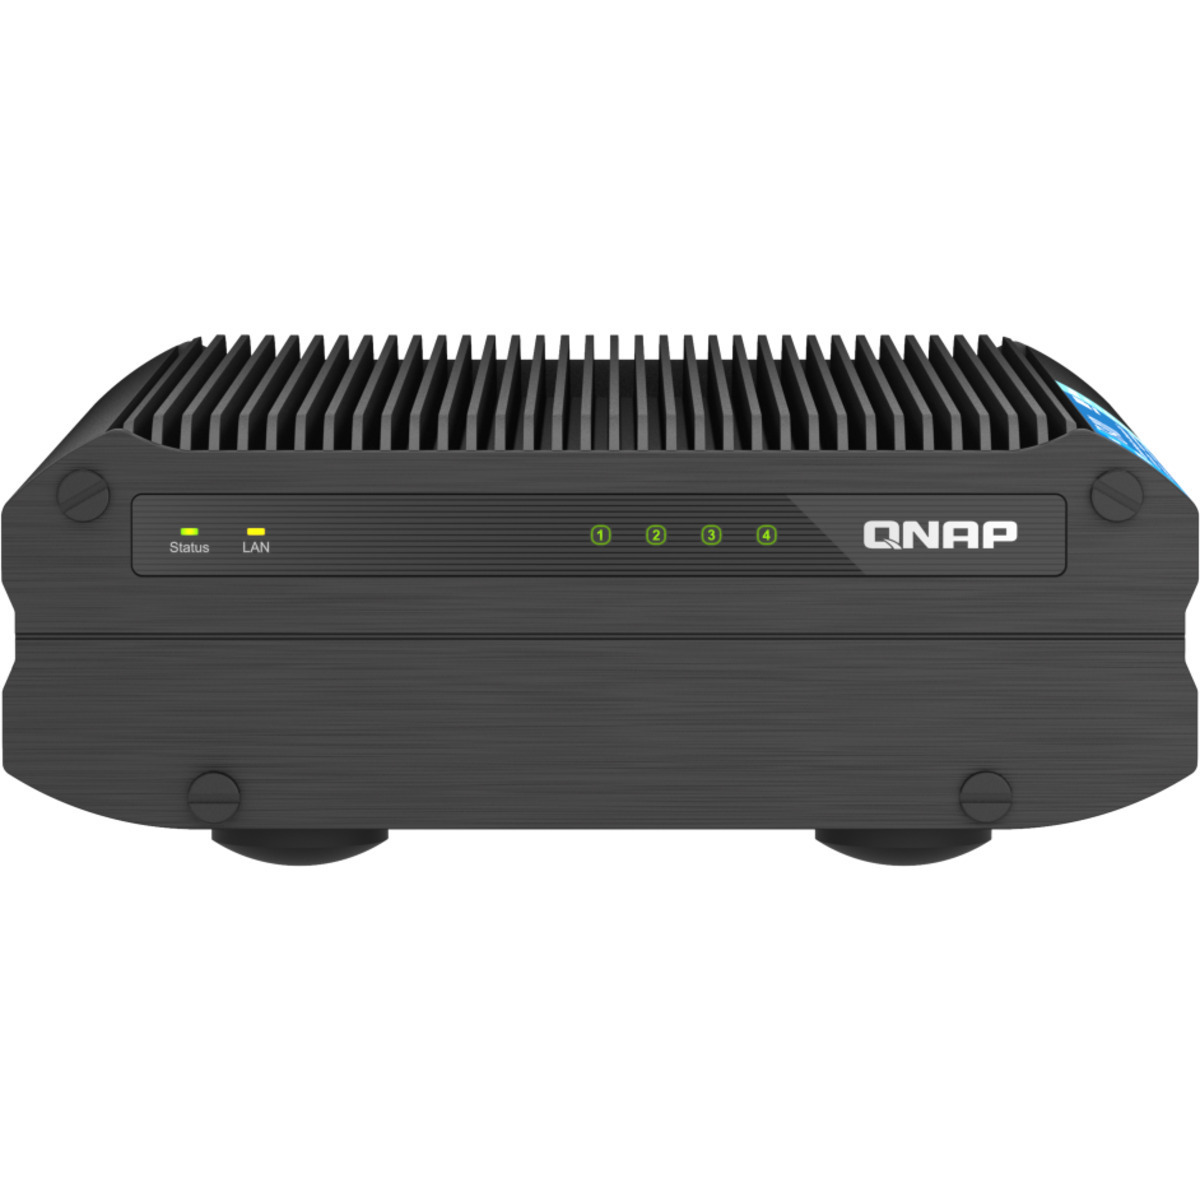 QNAP TS-i410X 12tb 4-Bay Desktop Multimedia / Power User / Business NAS - Network Attached Storage Device 3x4tb Western Digital Red SA500 WDS400T1R0A 2.5 560/530MB/s SATA 6Gb/s SSD NAS Class Drives Installed - Burn-In Tested TS-i410X